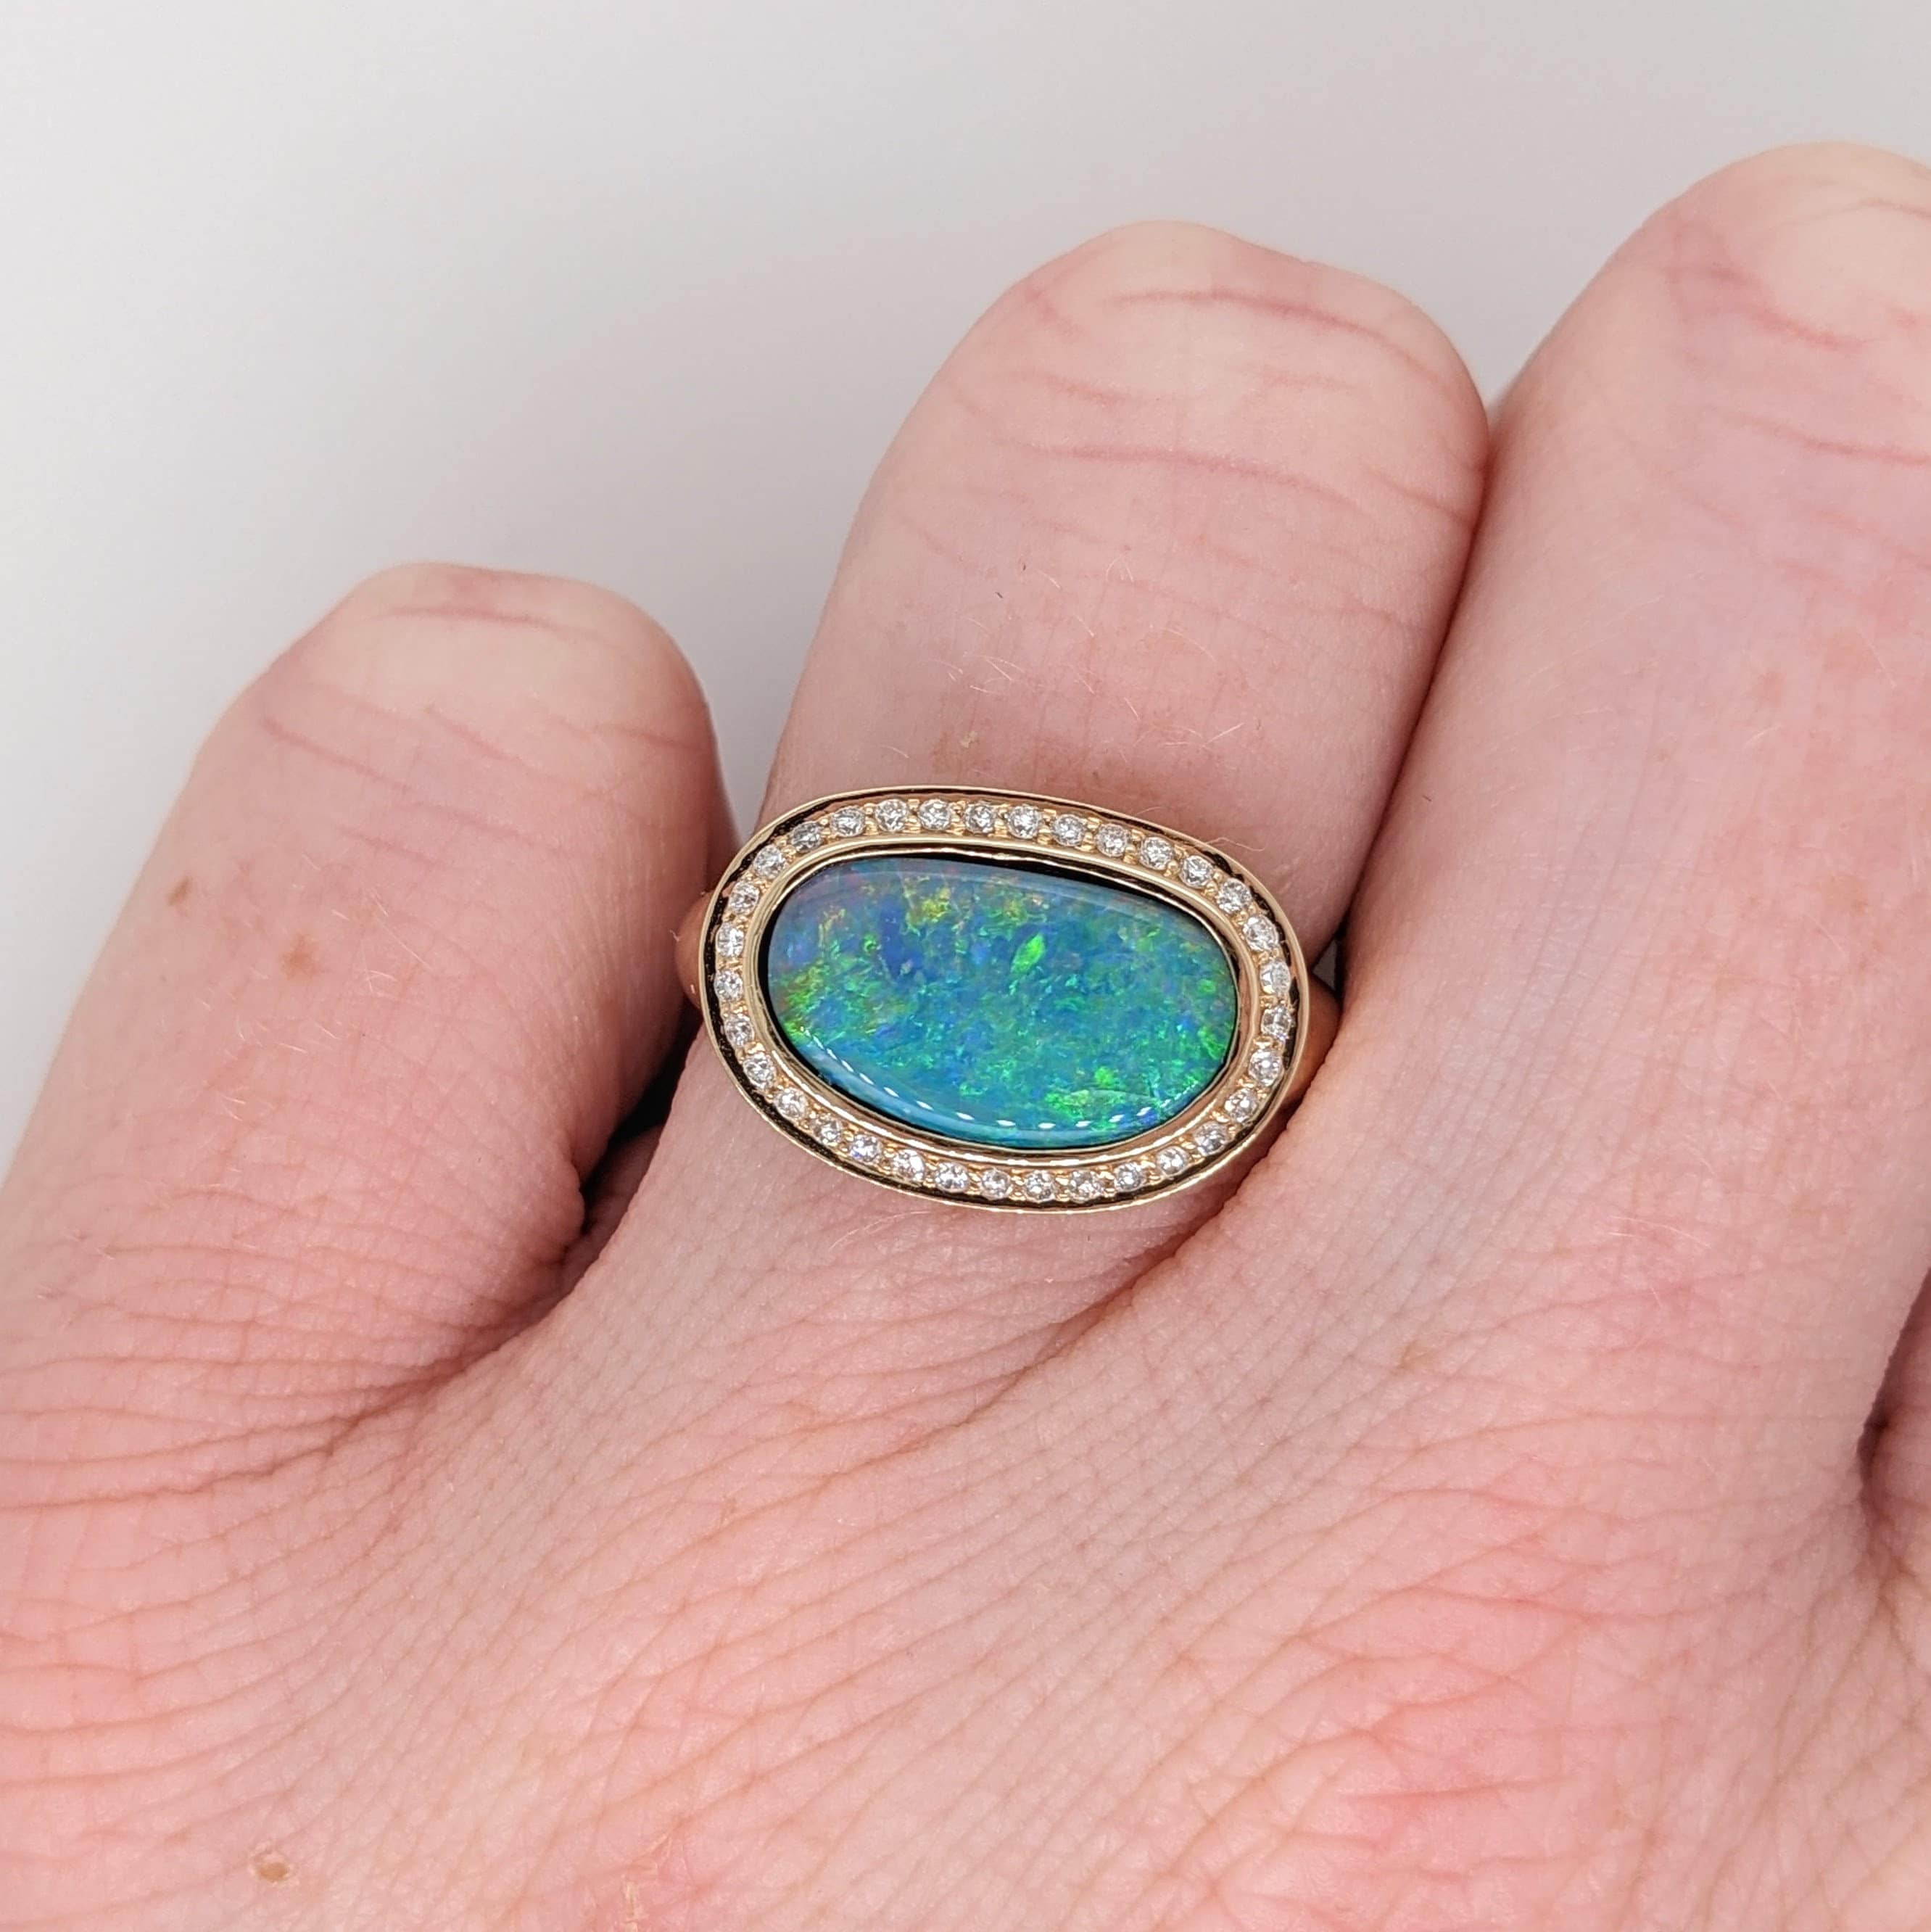 Unique Black Opal Ring Bezel Set in Solid 14k Yellow Gold with a Diamond Accented Halo | Boulder Opal Gemstone 13x7.8 | October Birthstone